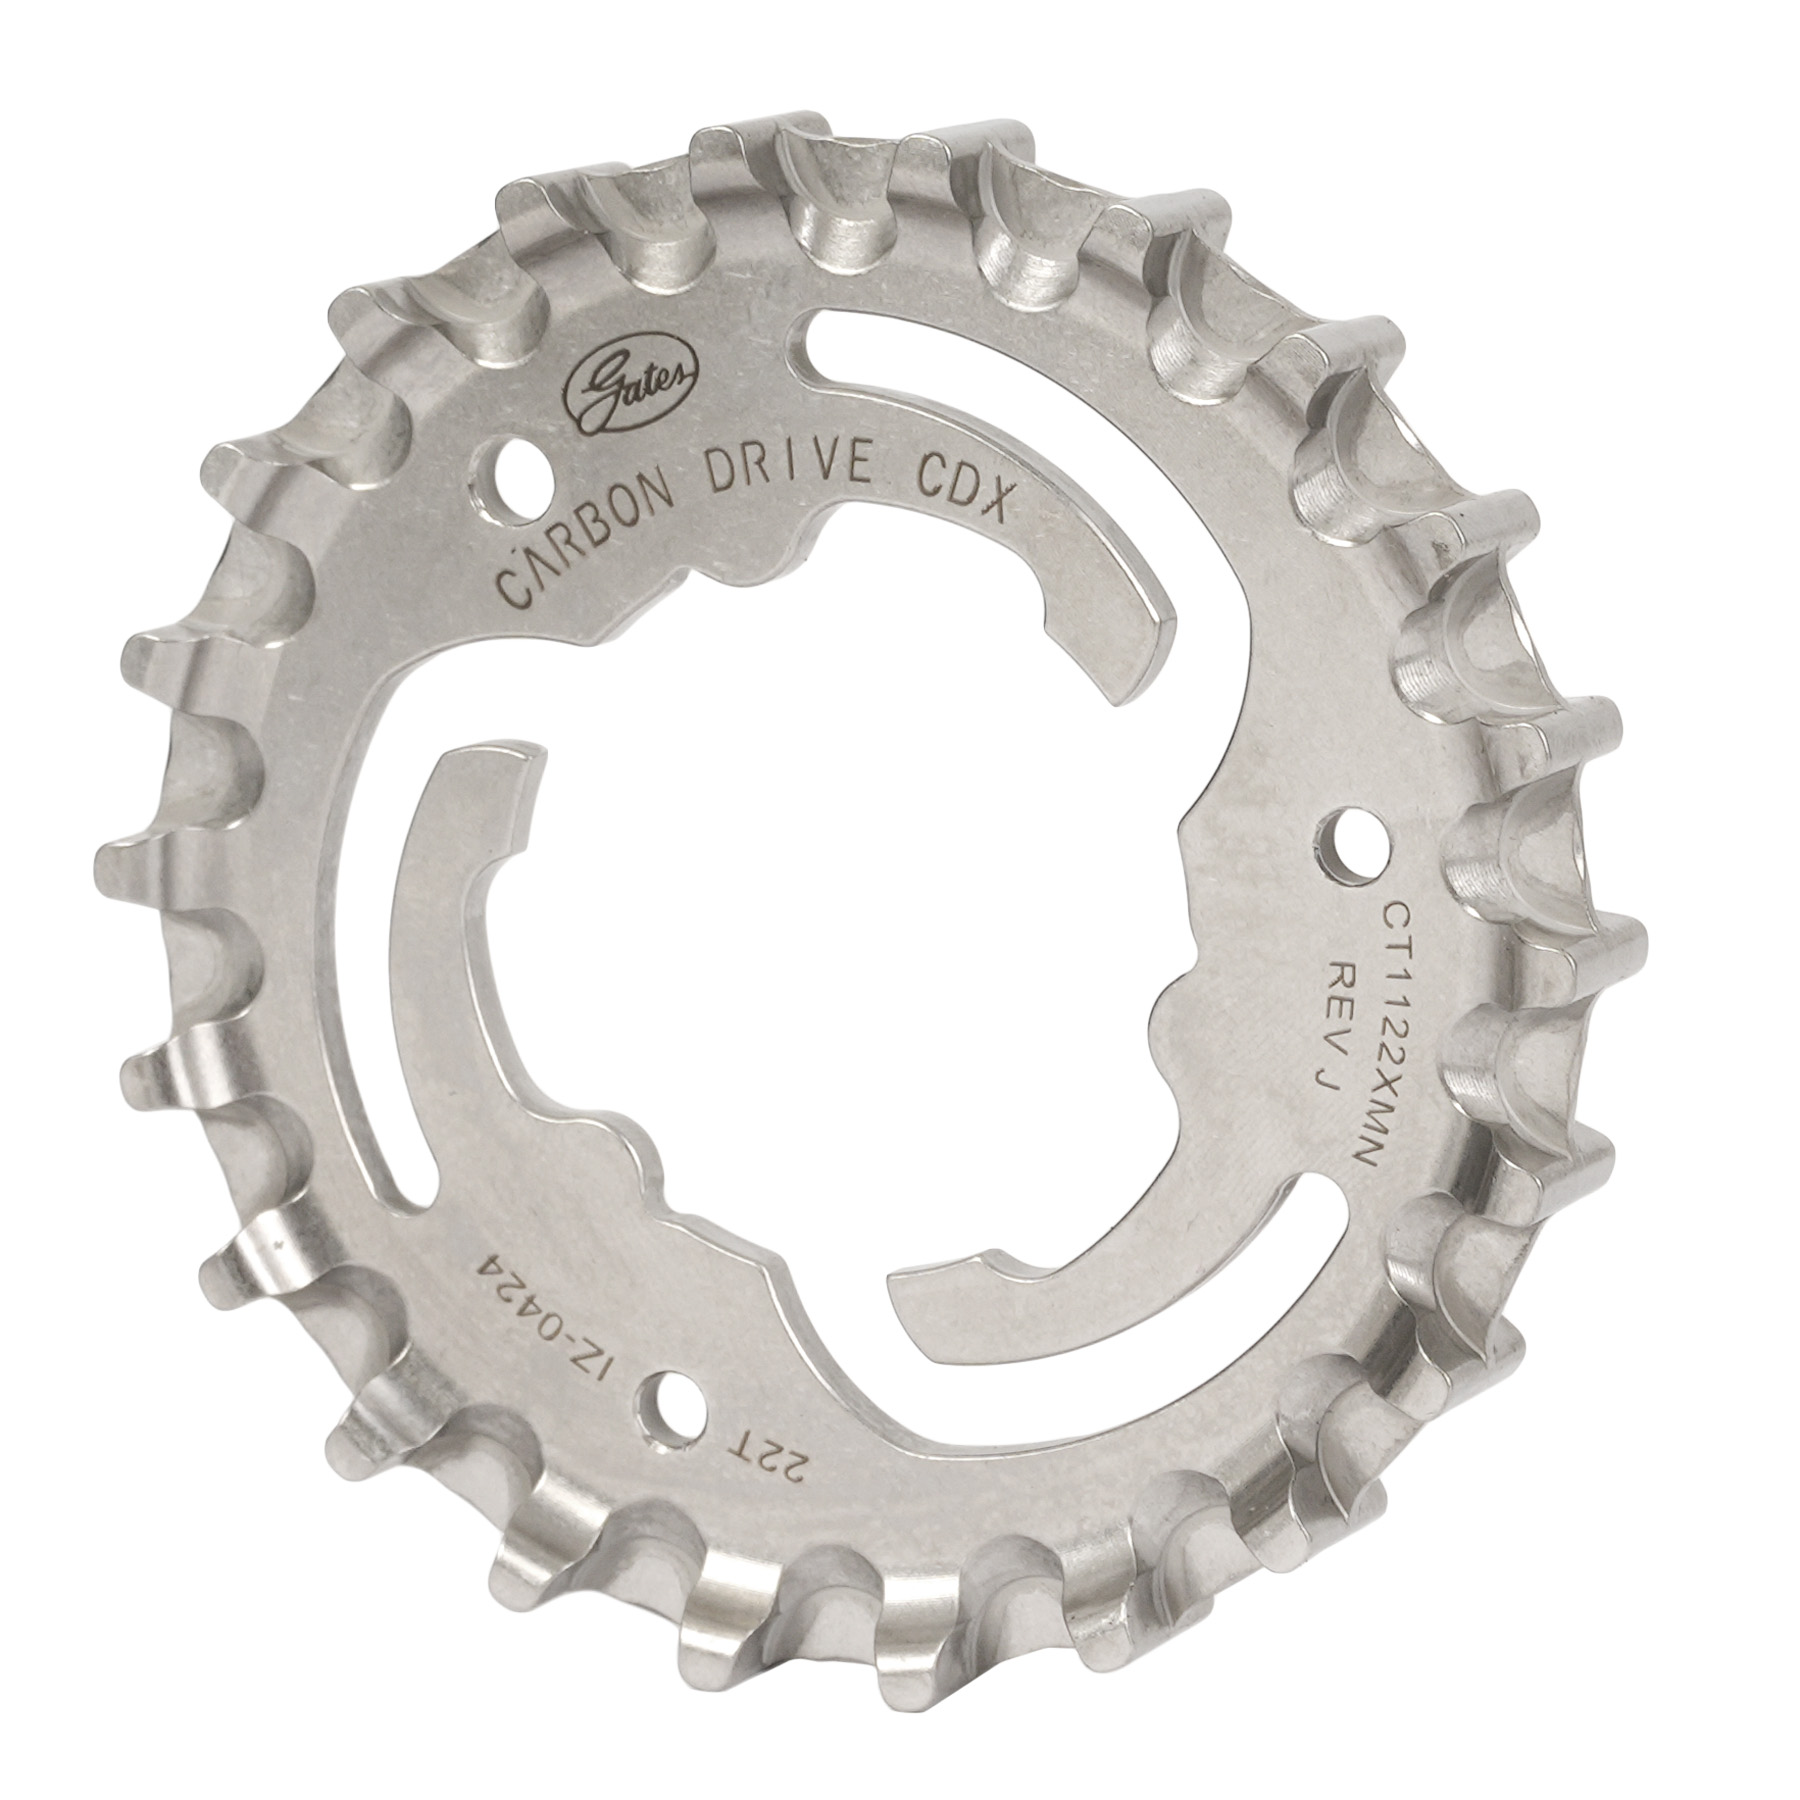 Productfoto van Gates Carbon Drive CDX Centertrack-Sprocket - Rear | Sure Fit / Shimano/Sram - stainless steel